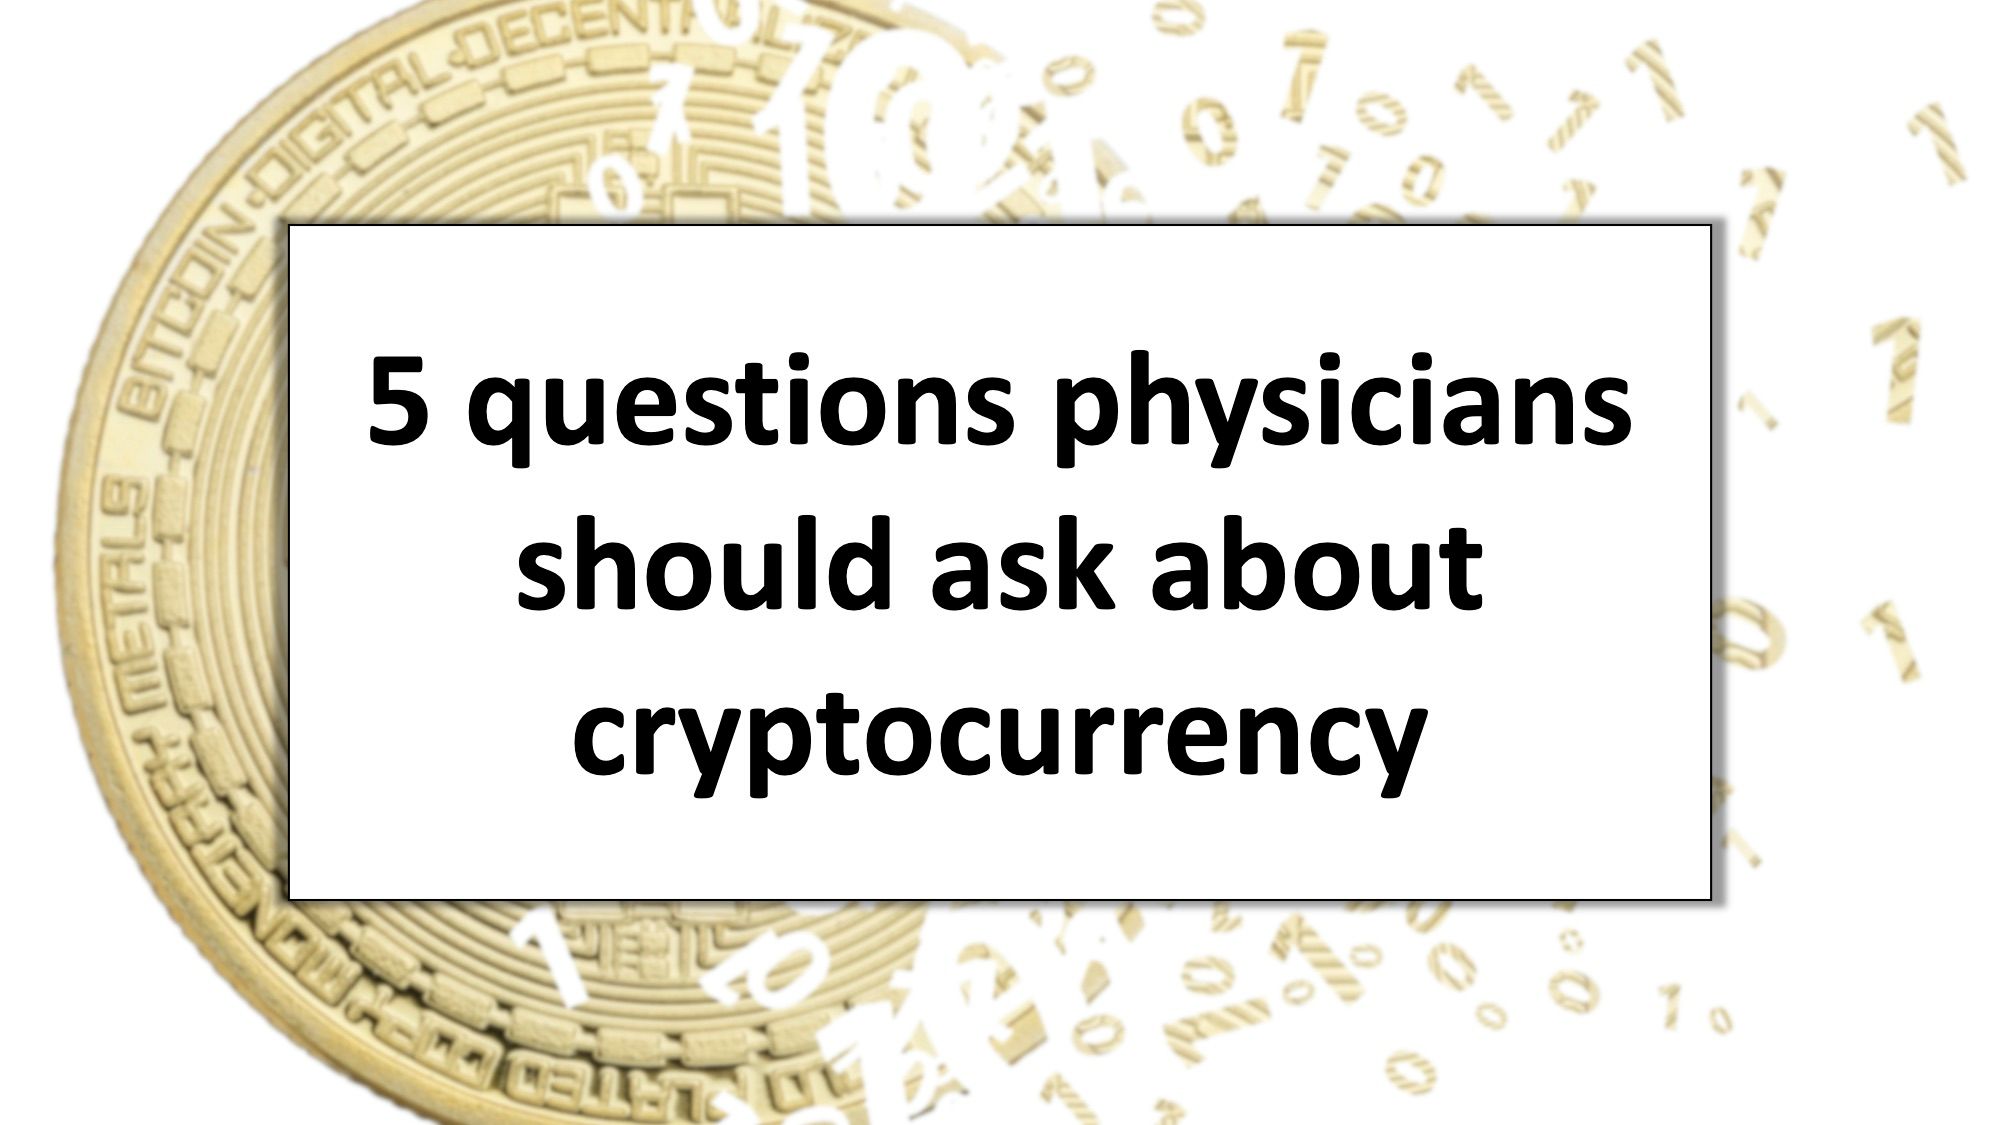 5 questions physicians should ask about cryptocurrency